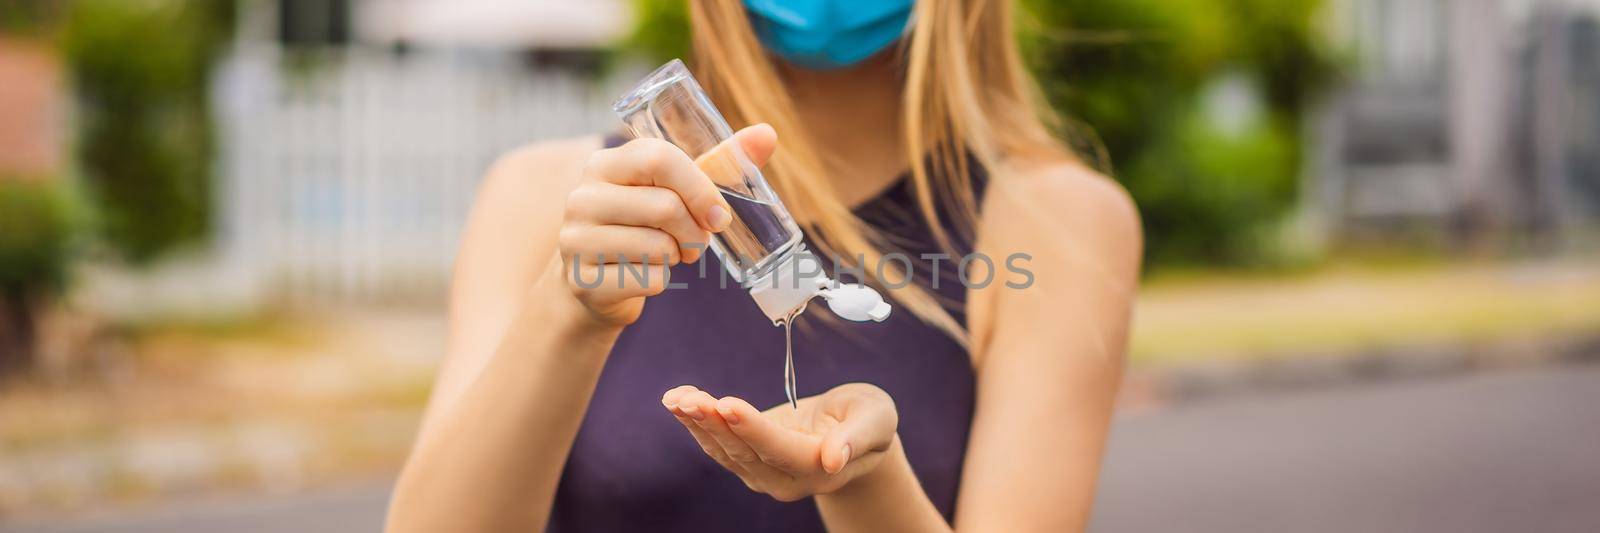 Woman in a small town in a medical mask uses a sanitizer because of a coronovirus epidemic. BANNER, LONG FORMAT